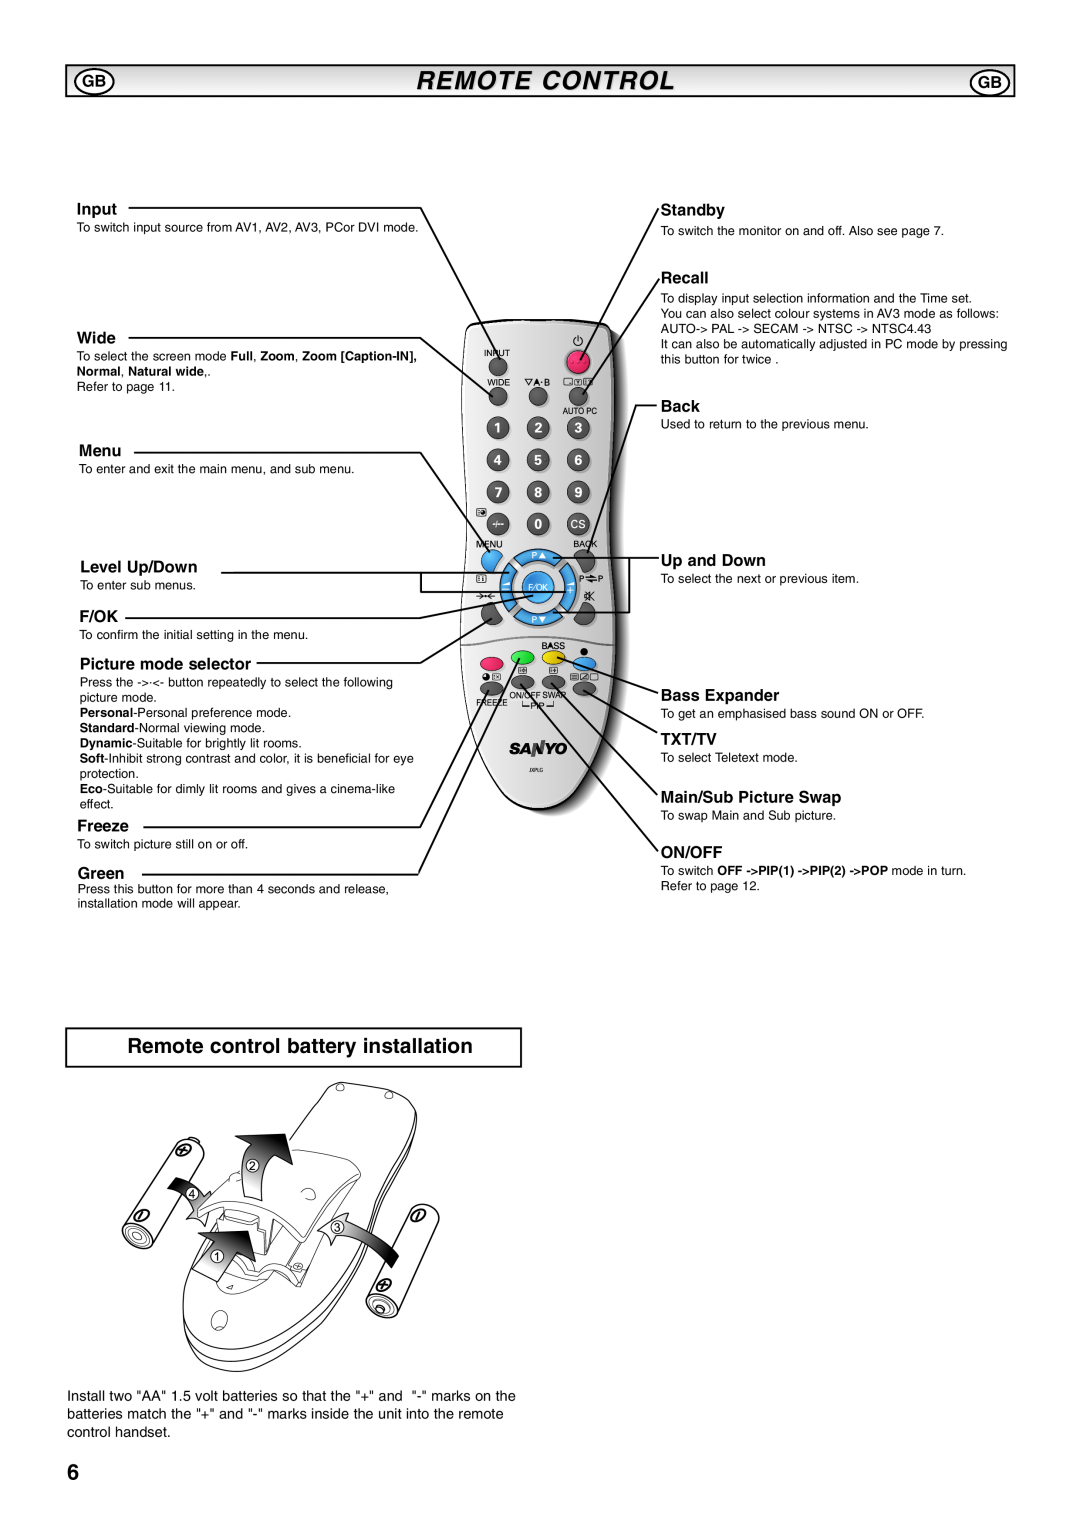 Sanyo CE52LH1R instruction manual Remote Control, Remote control battery installation 